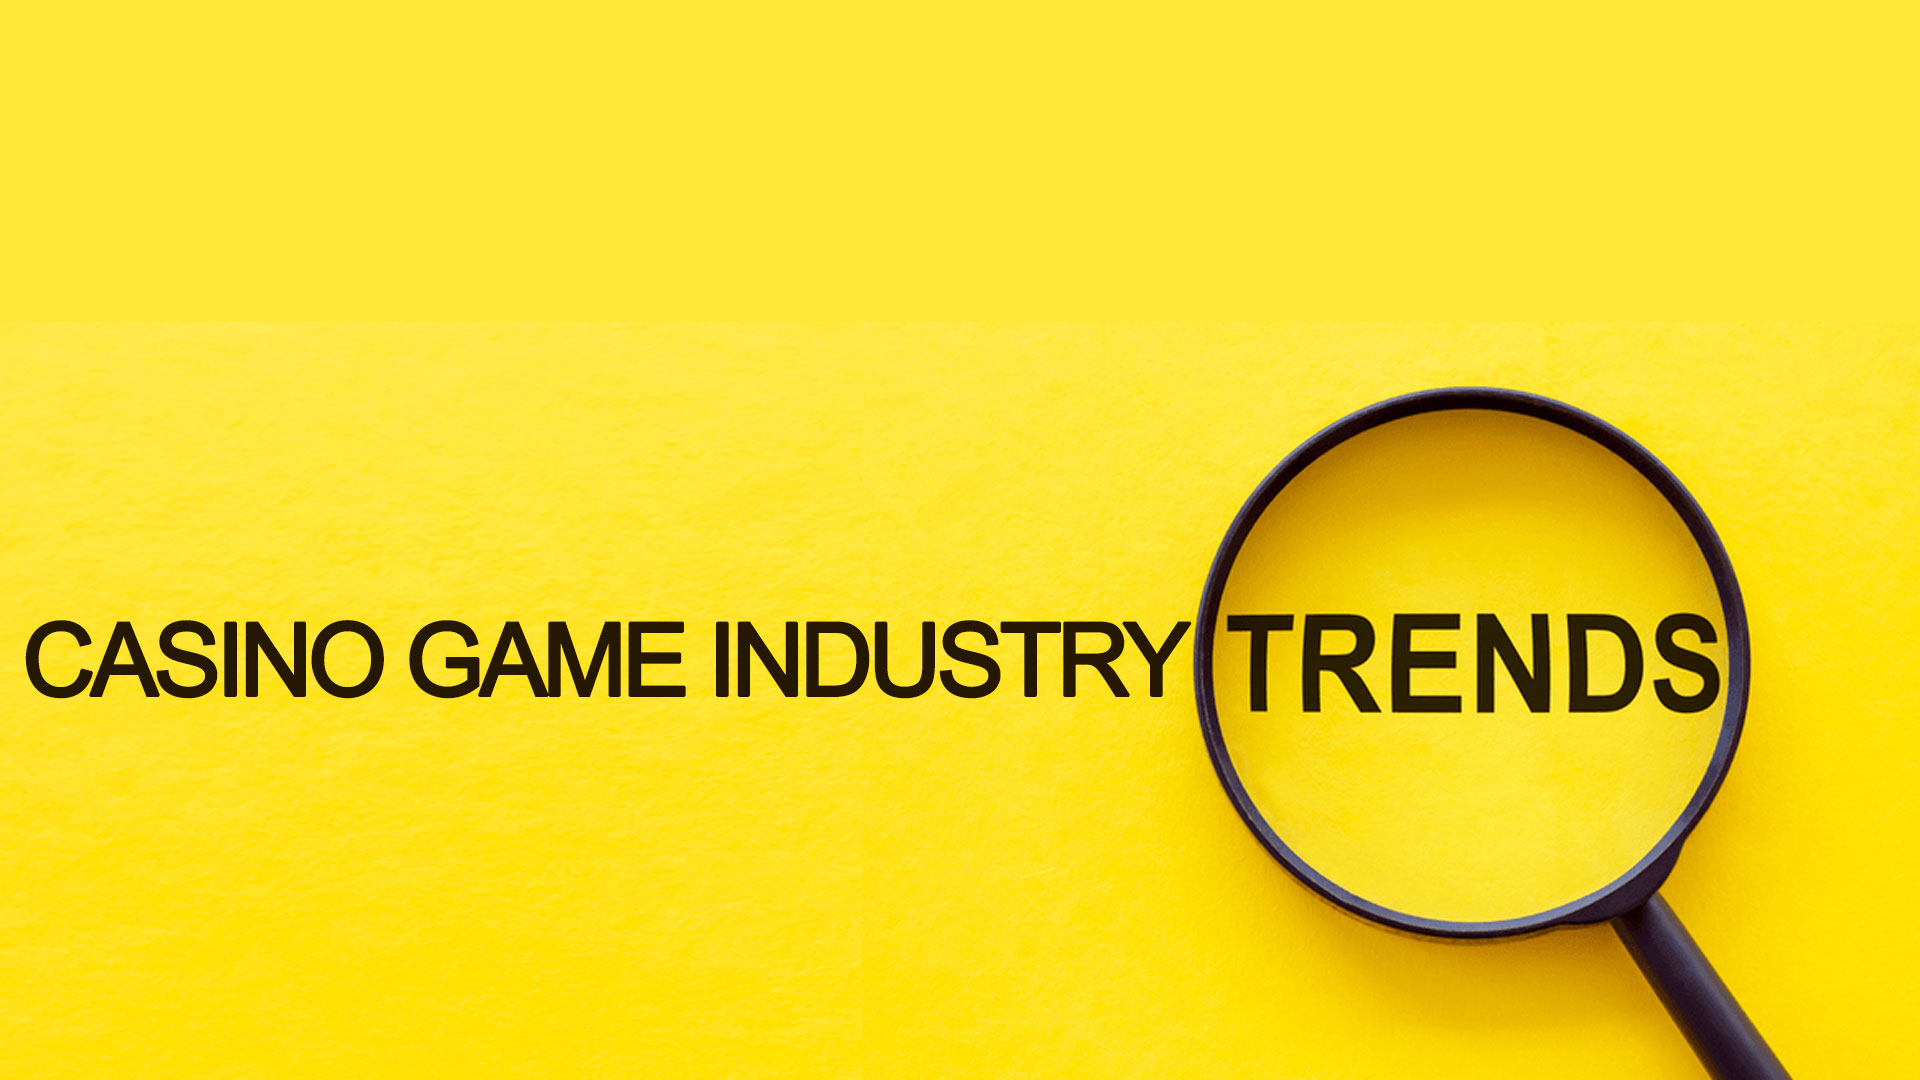 Casino Game Industry Trends For 2022